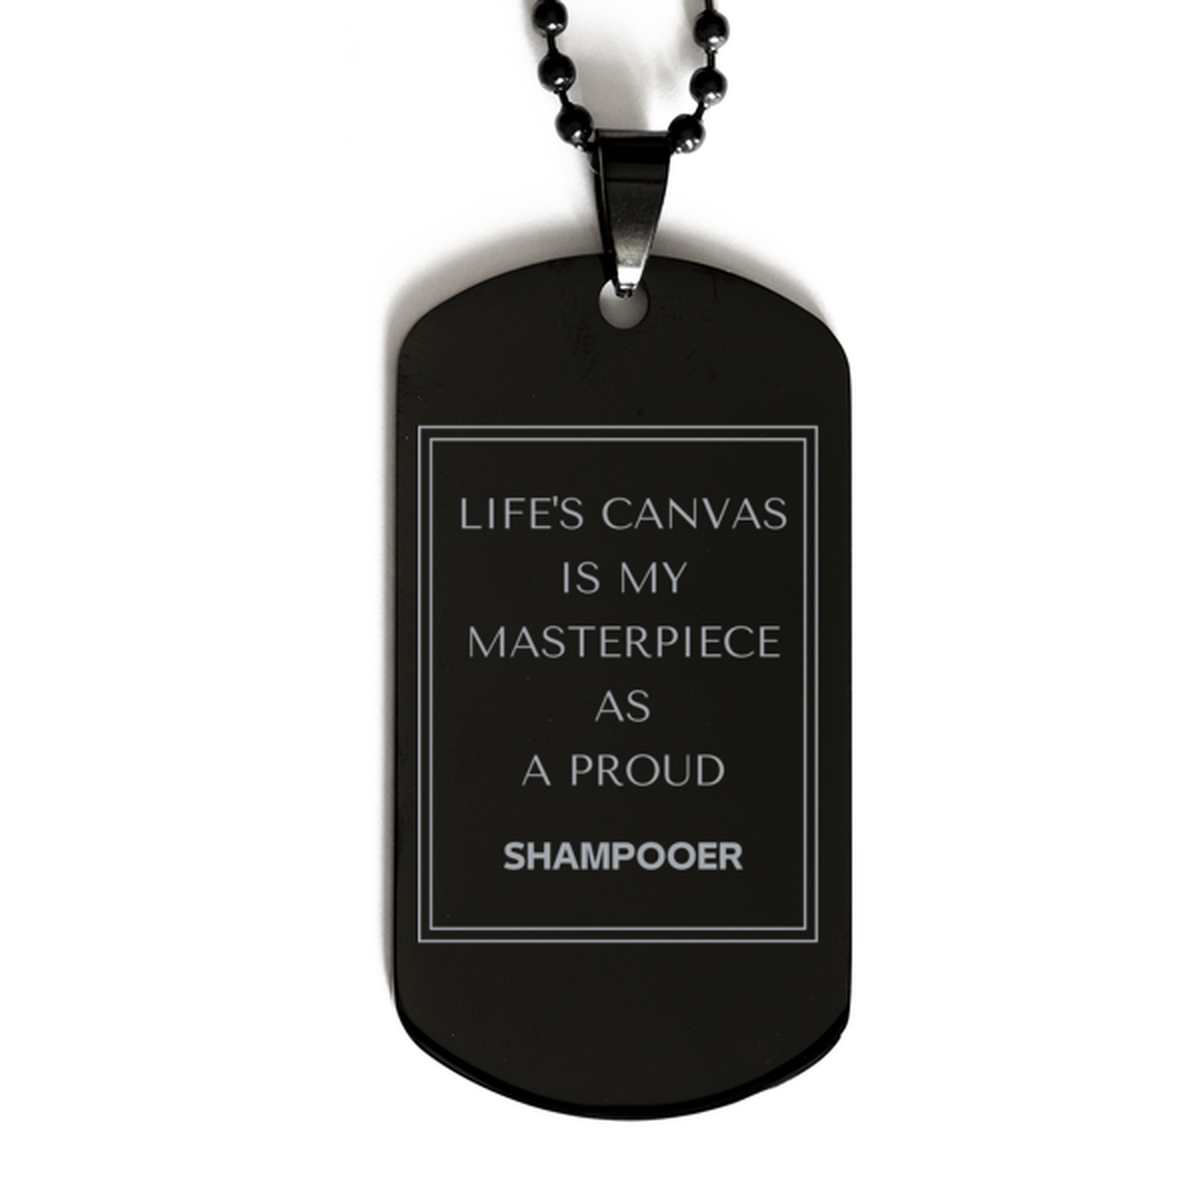 Proud Shampooer Gifts, Life's canvas is my masterpiece, Epic Birthday Christmas Unique Black Dog Tag For Shampooer, Coworkers, Men, Women, Friends